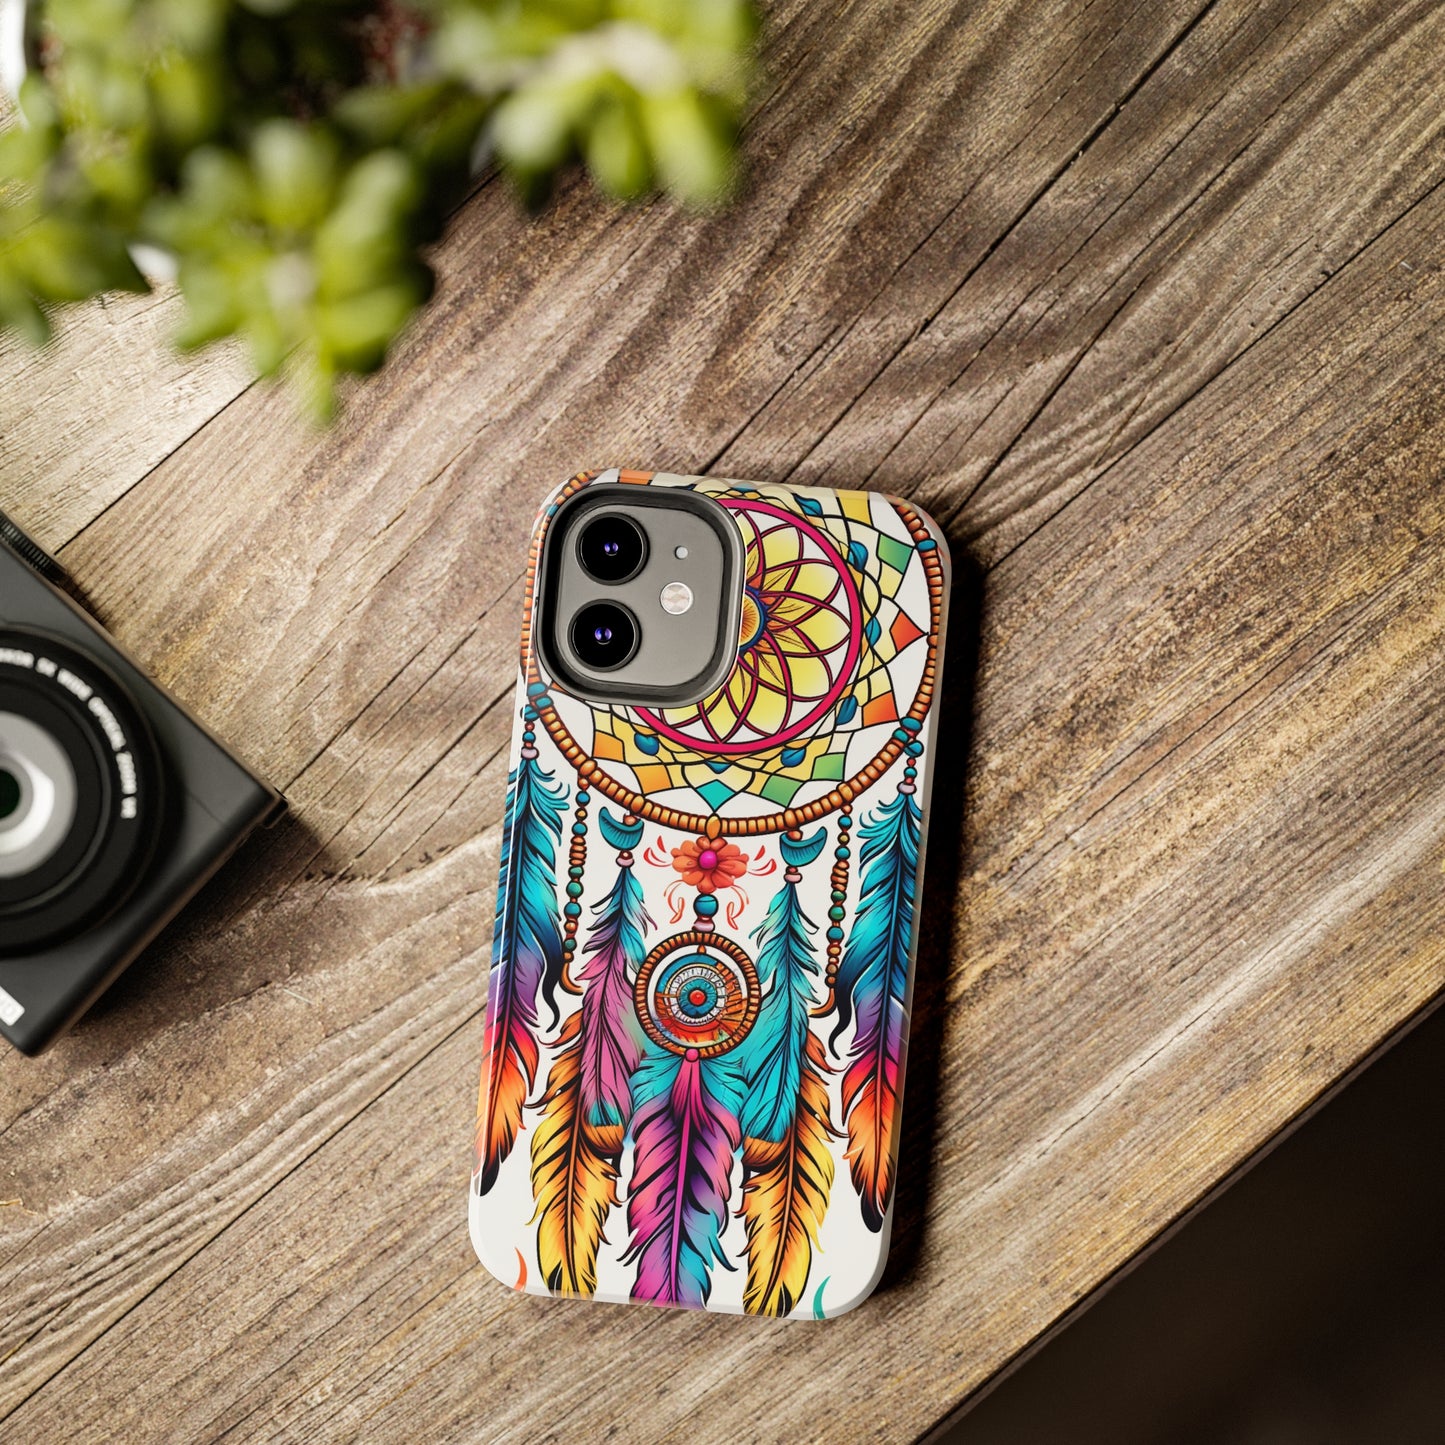 Psychedelic Native American Dreamcatcher iPhone Case | Fusion of Art and Cultural Heritage